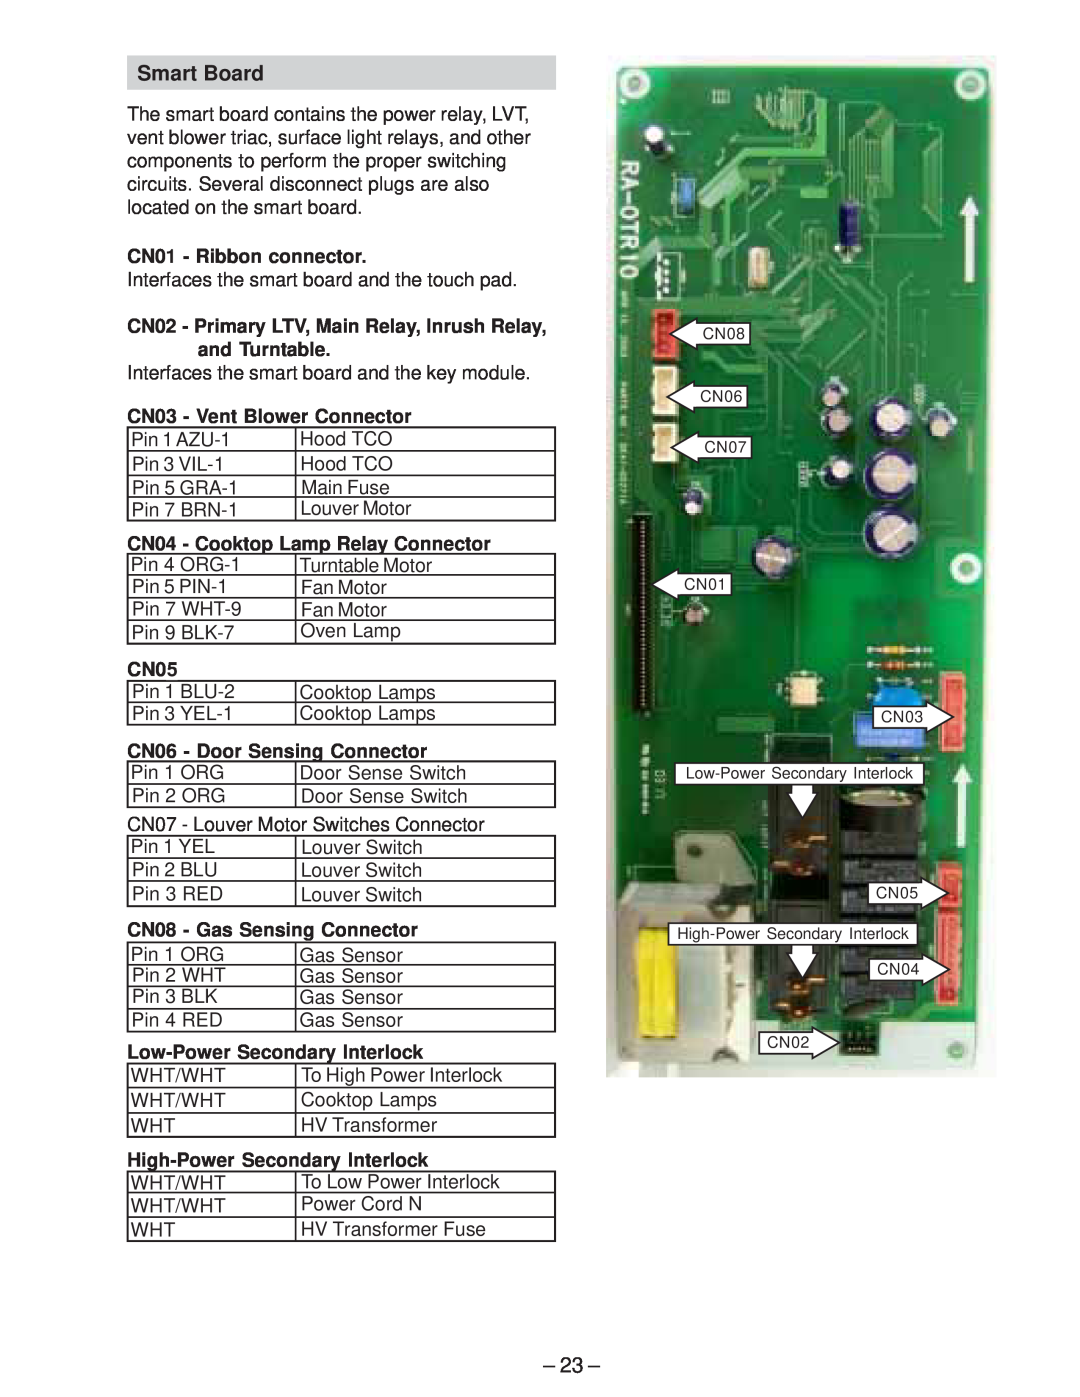 GE JVM2070_H manual Smart Board, CN01 - Ribbon connector, CN02 - Primary LTV, Main Relay, Inrush Relay, and Turntable, CN05 